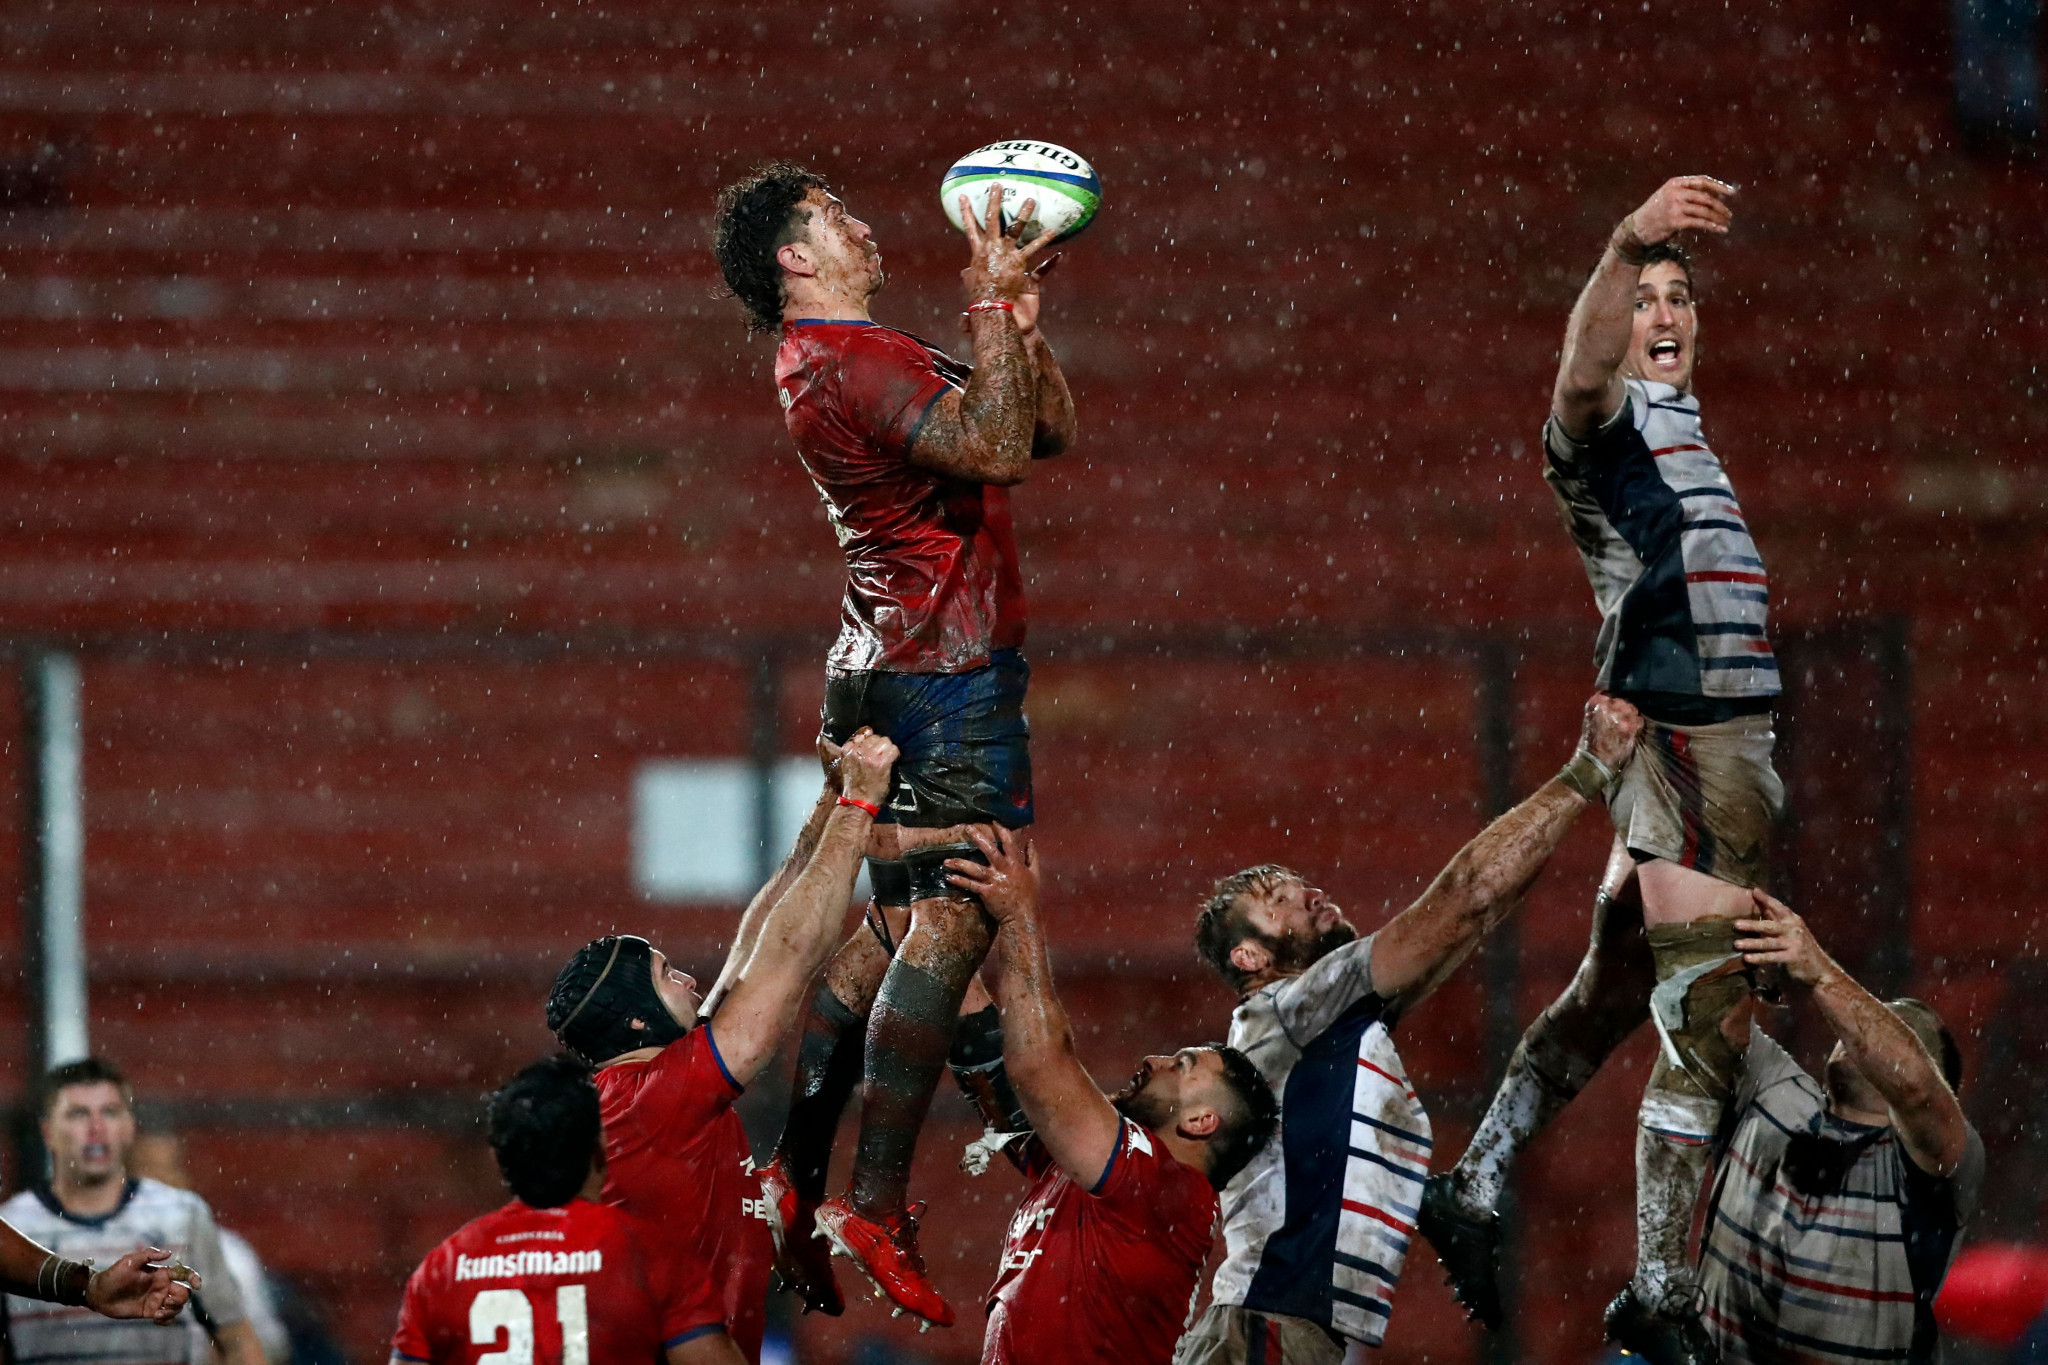 Chile qualify for 2023 Rugby World Cup with stunning aggregate win over future hosts US